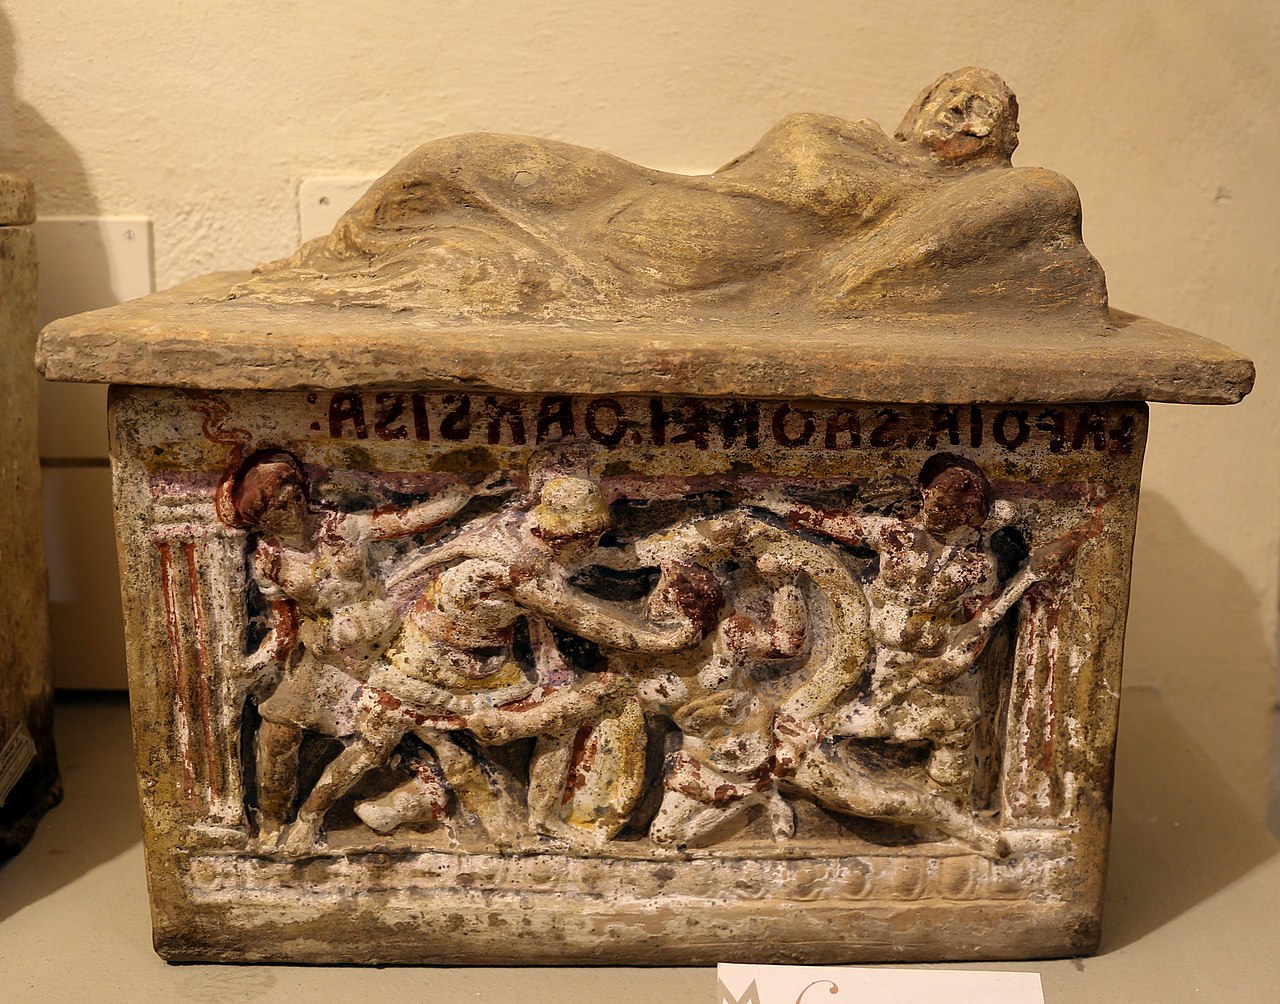 Cinerary urn in the Civic Museum of Montepulciano